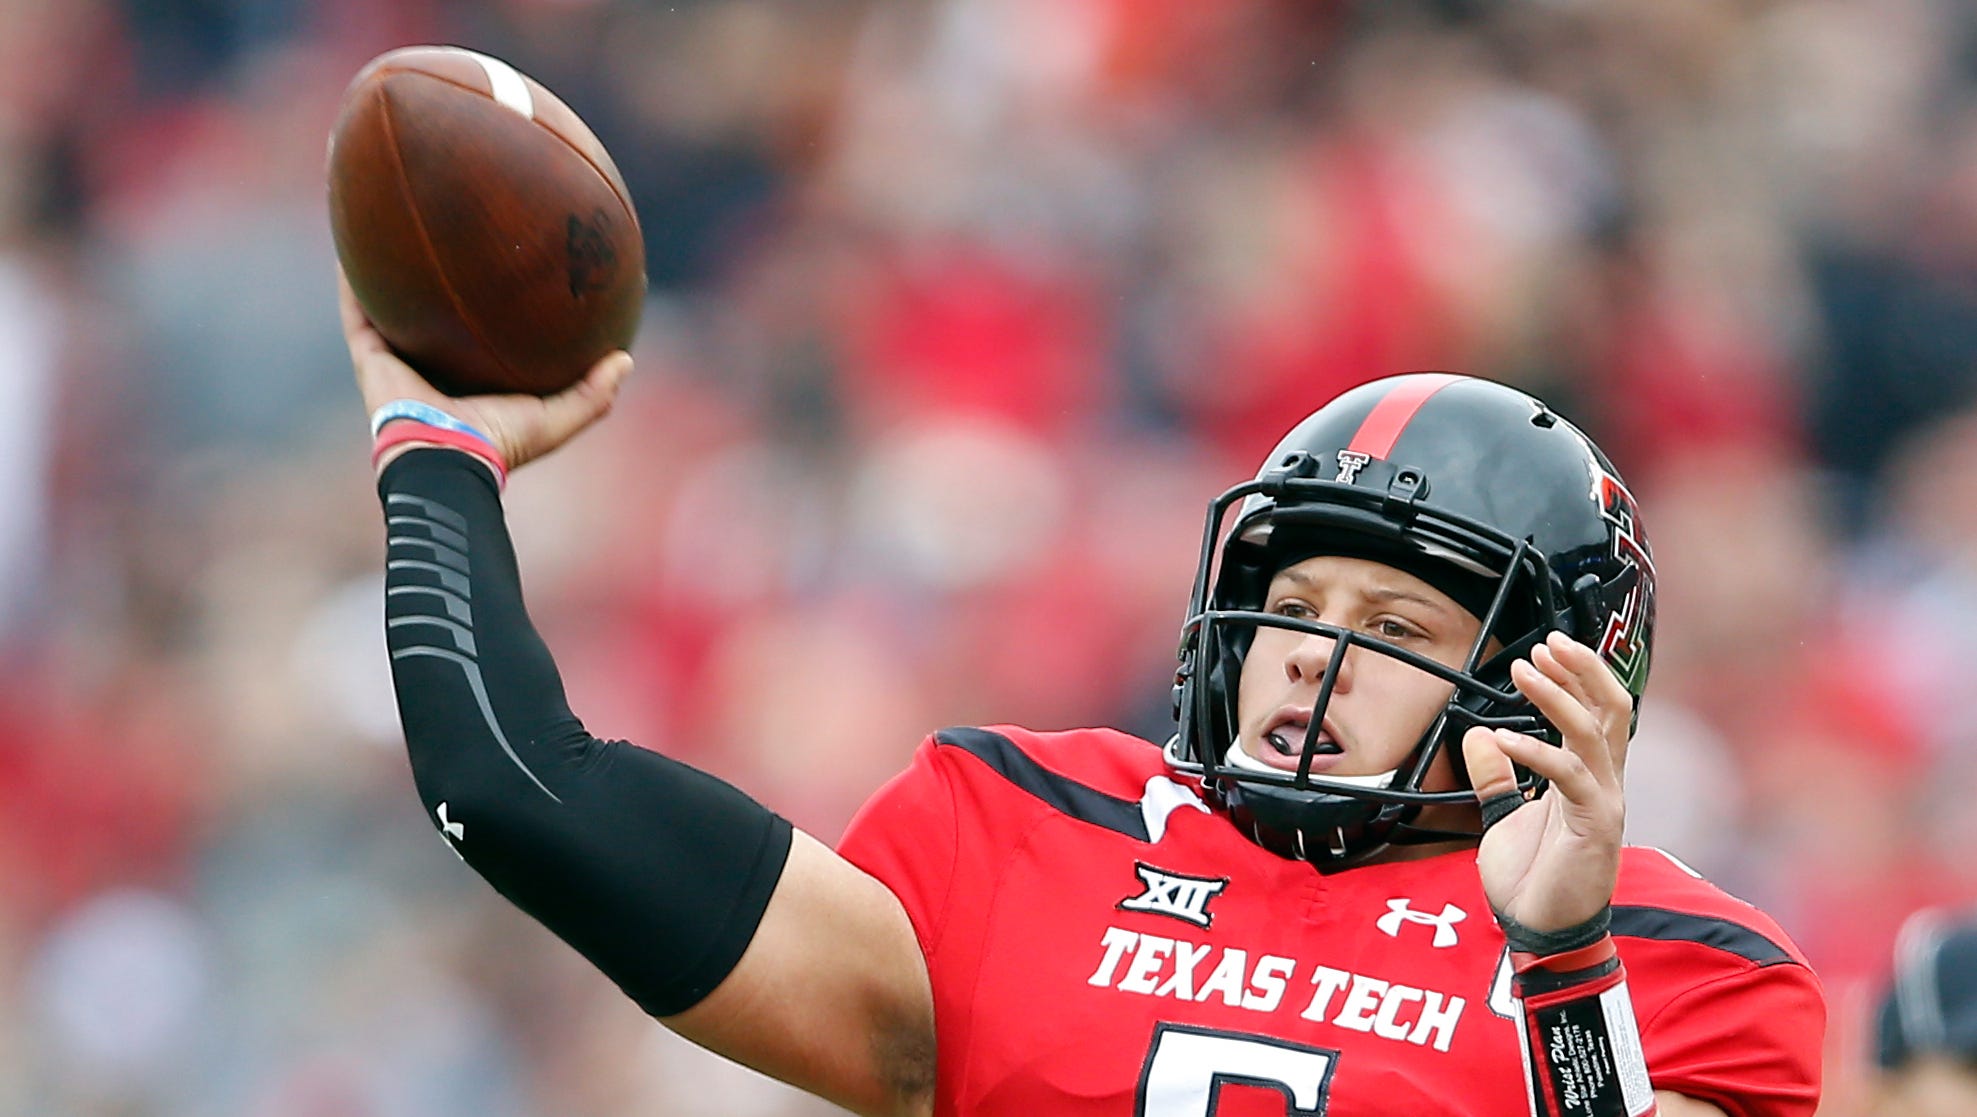 Texas Tech's Patrick Mahomes is the top-ranked quarterback in the draft.